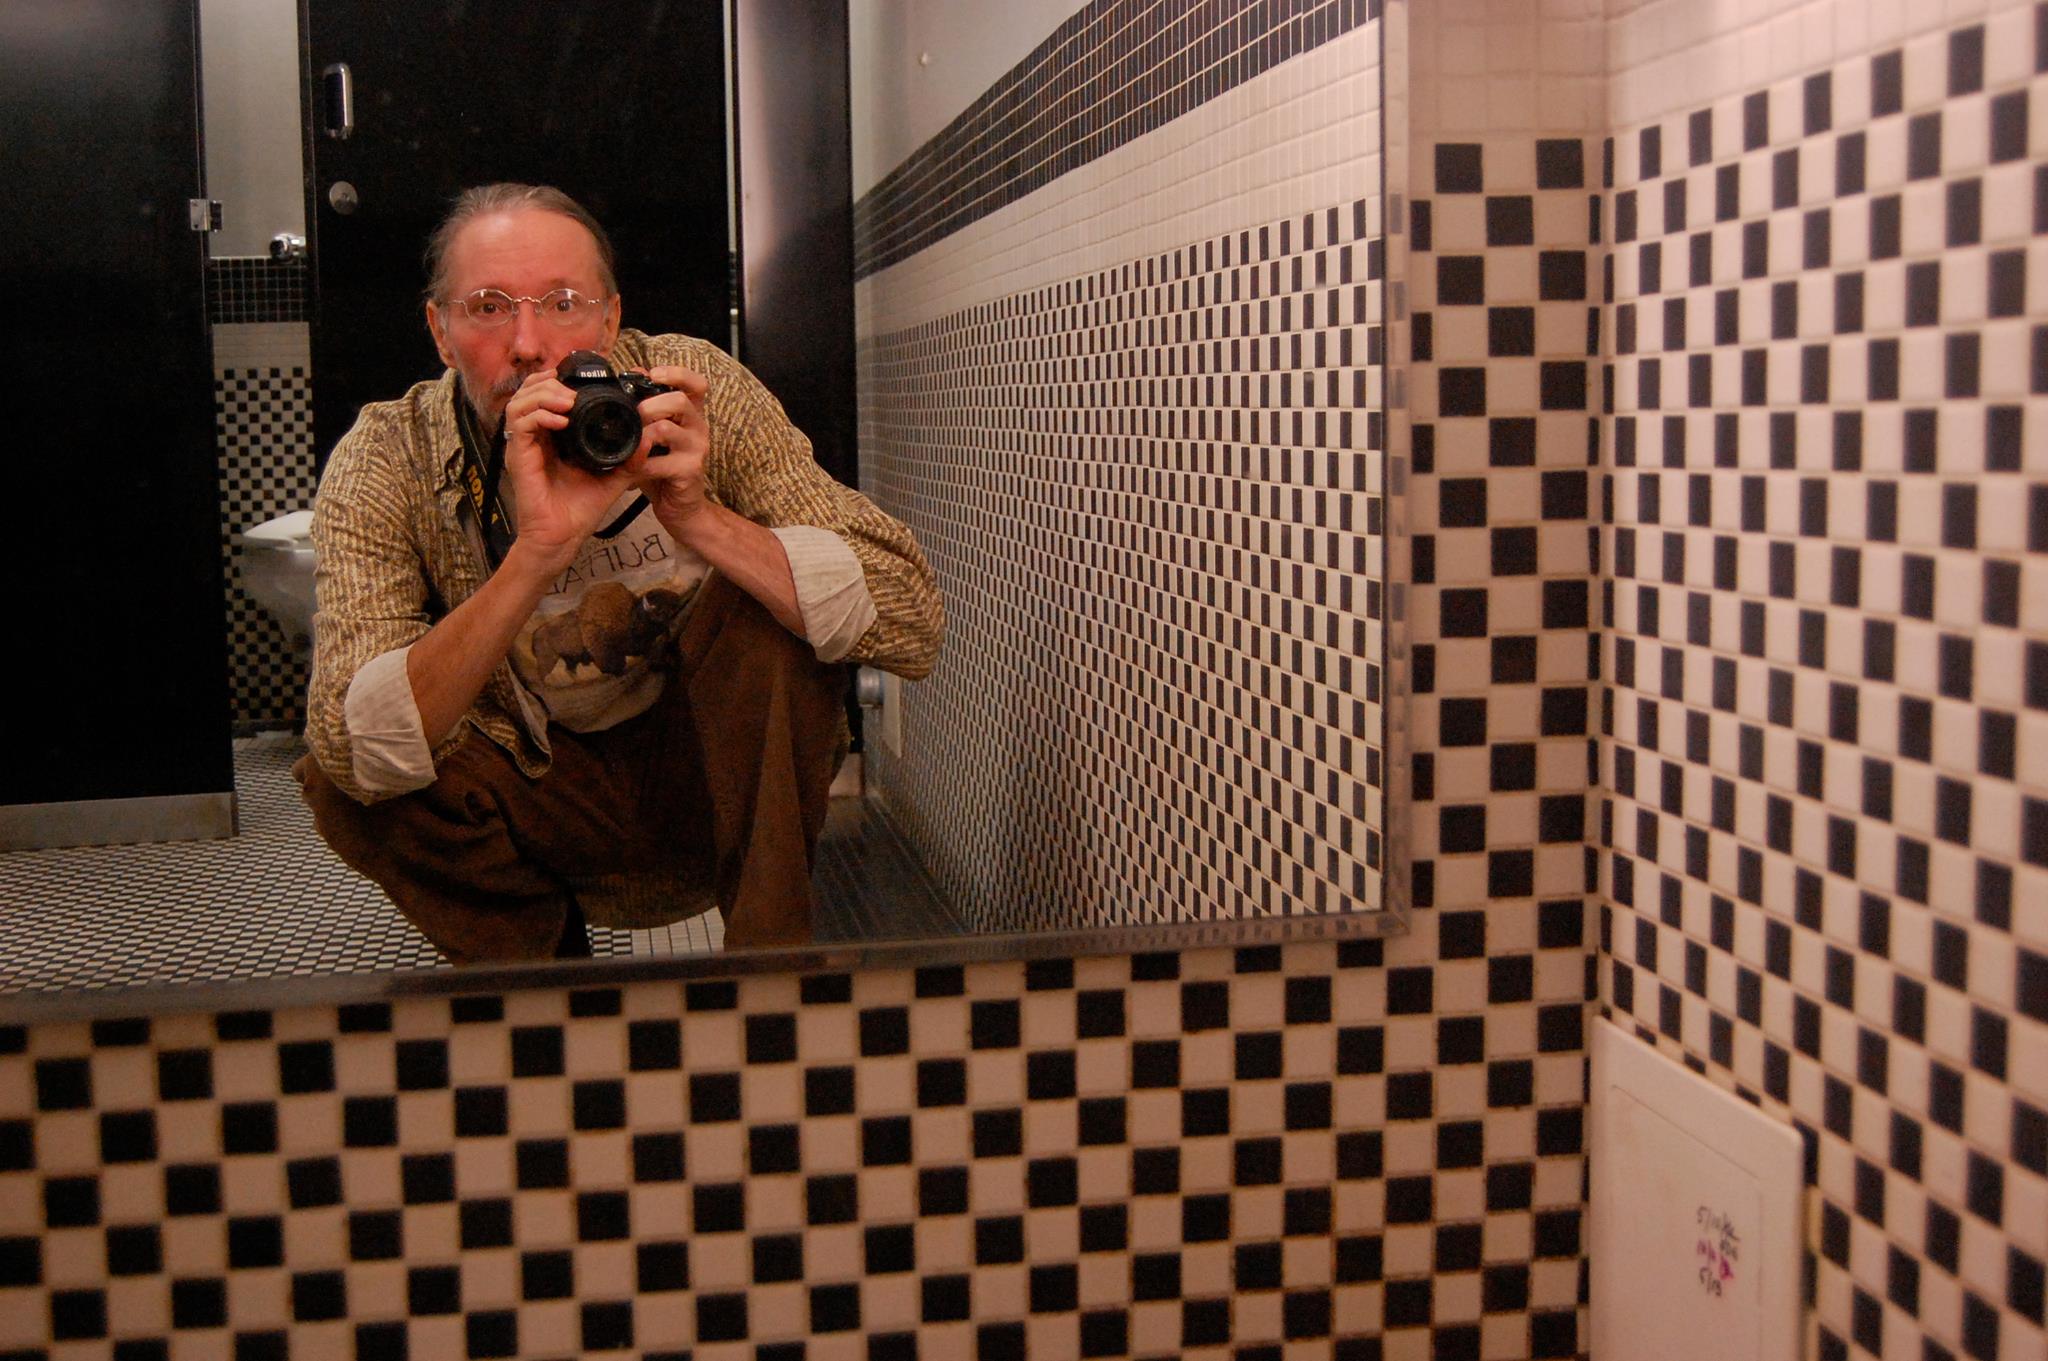 Photographer self-portrait in the mirror of a bathroom with checkered tiles